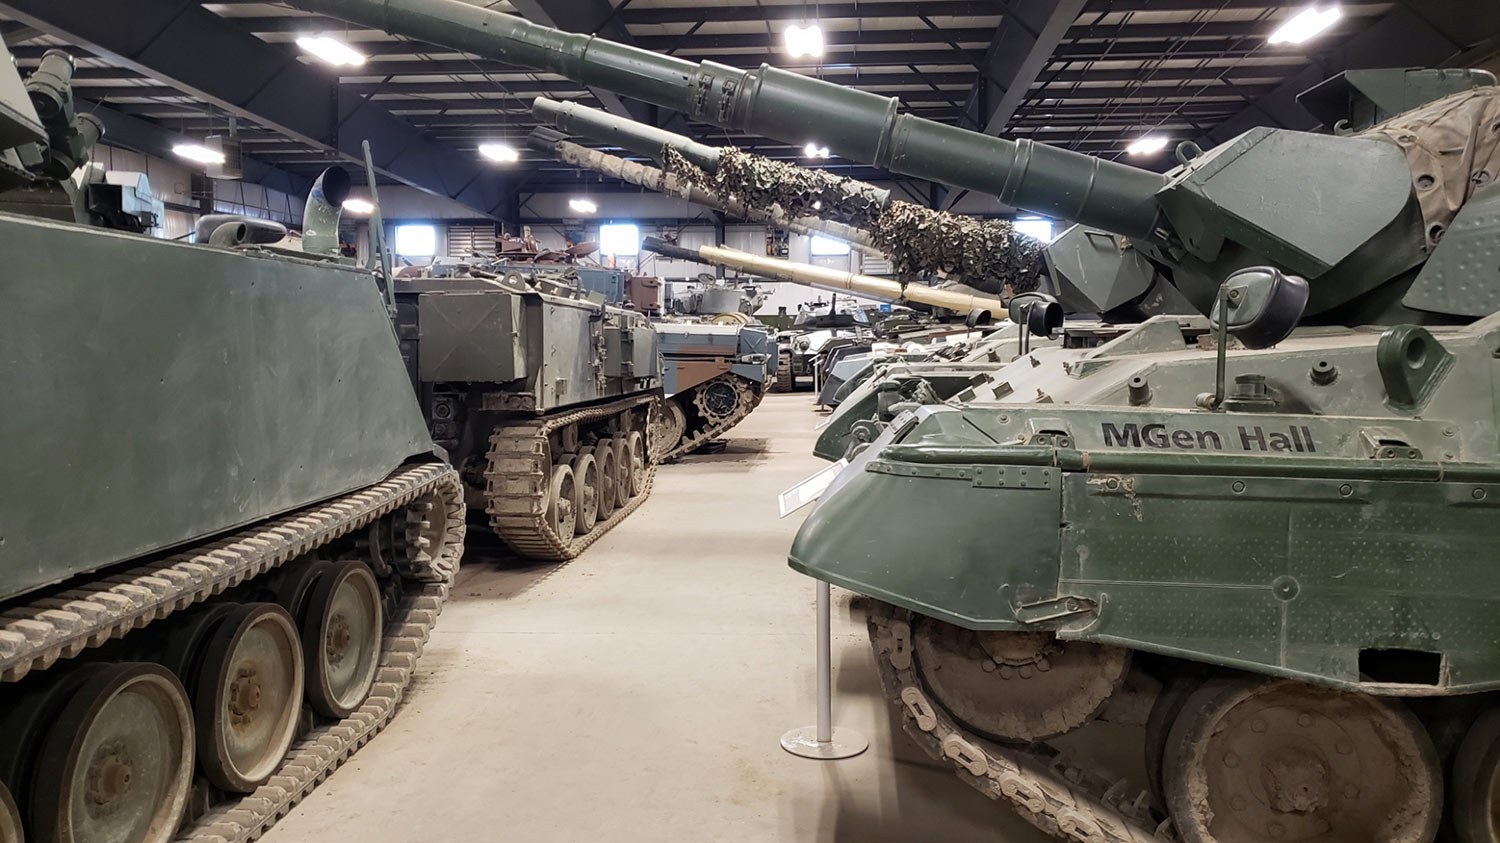 The Arrival of the Sherman Tank - The Ontario Regiment RCAC Museum